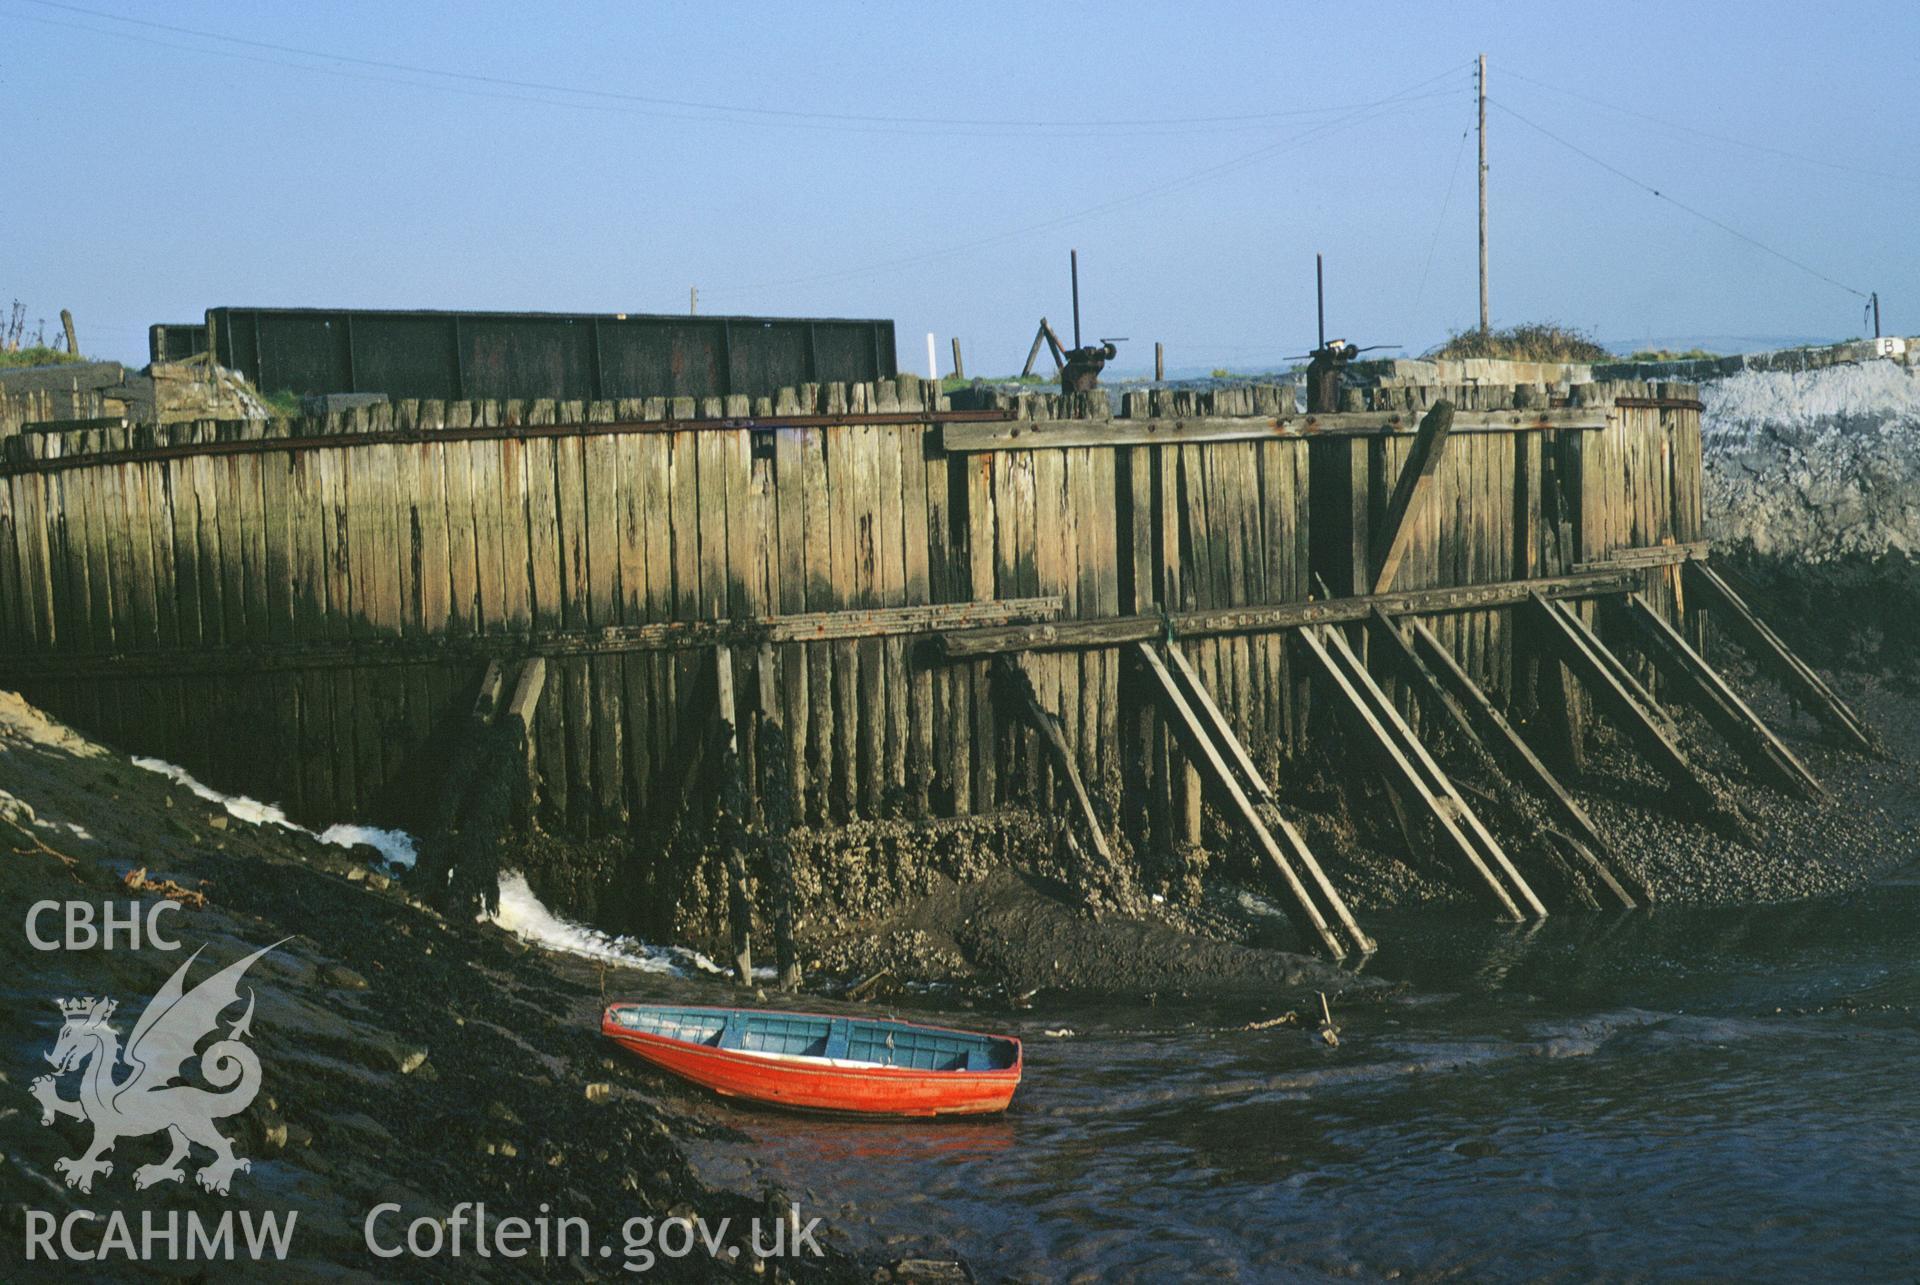 35mm colour slide of coffer dam at Burry Port Harbour, by Dylan Roberts.